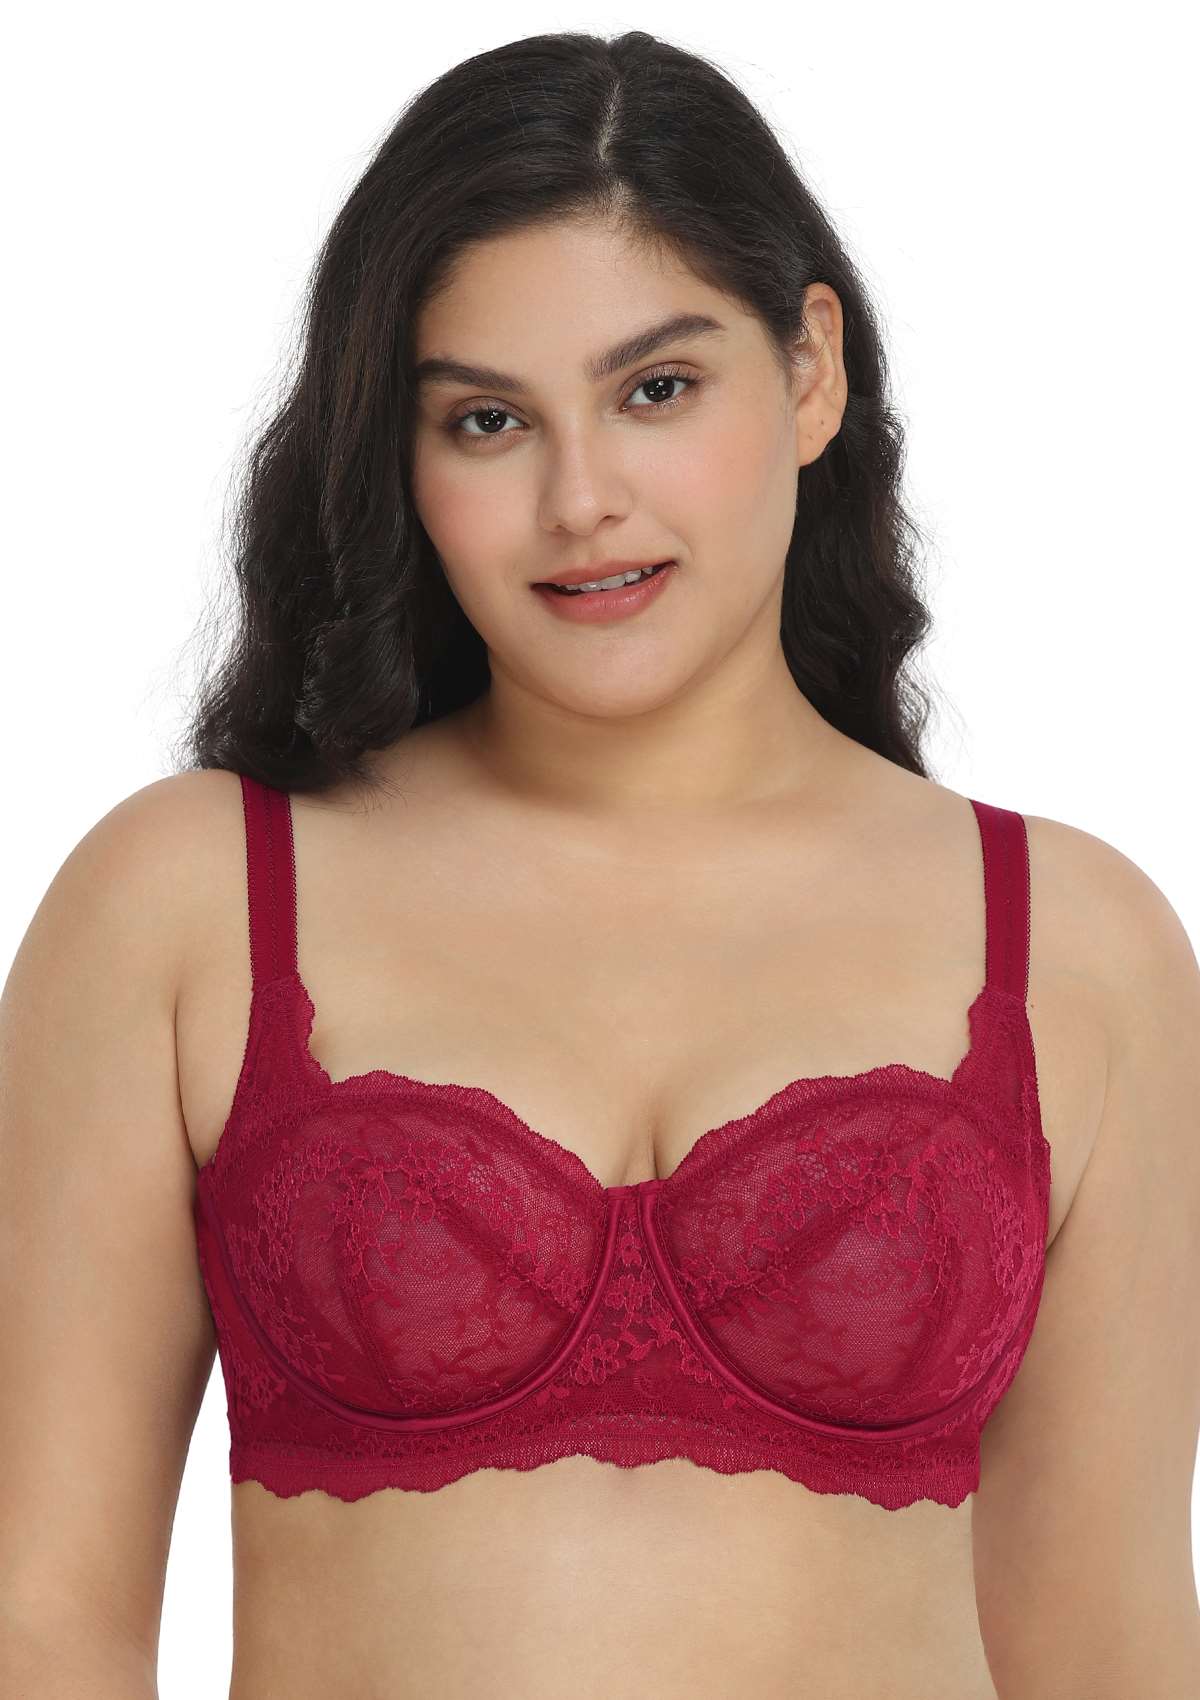 HSIA I Do Floral Lace Bridal Balconette Beautiful Bra For Special Day - Burgundy / 38 / D